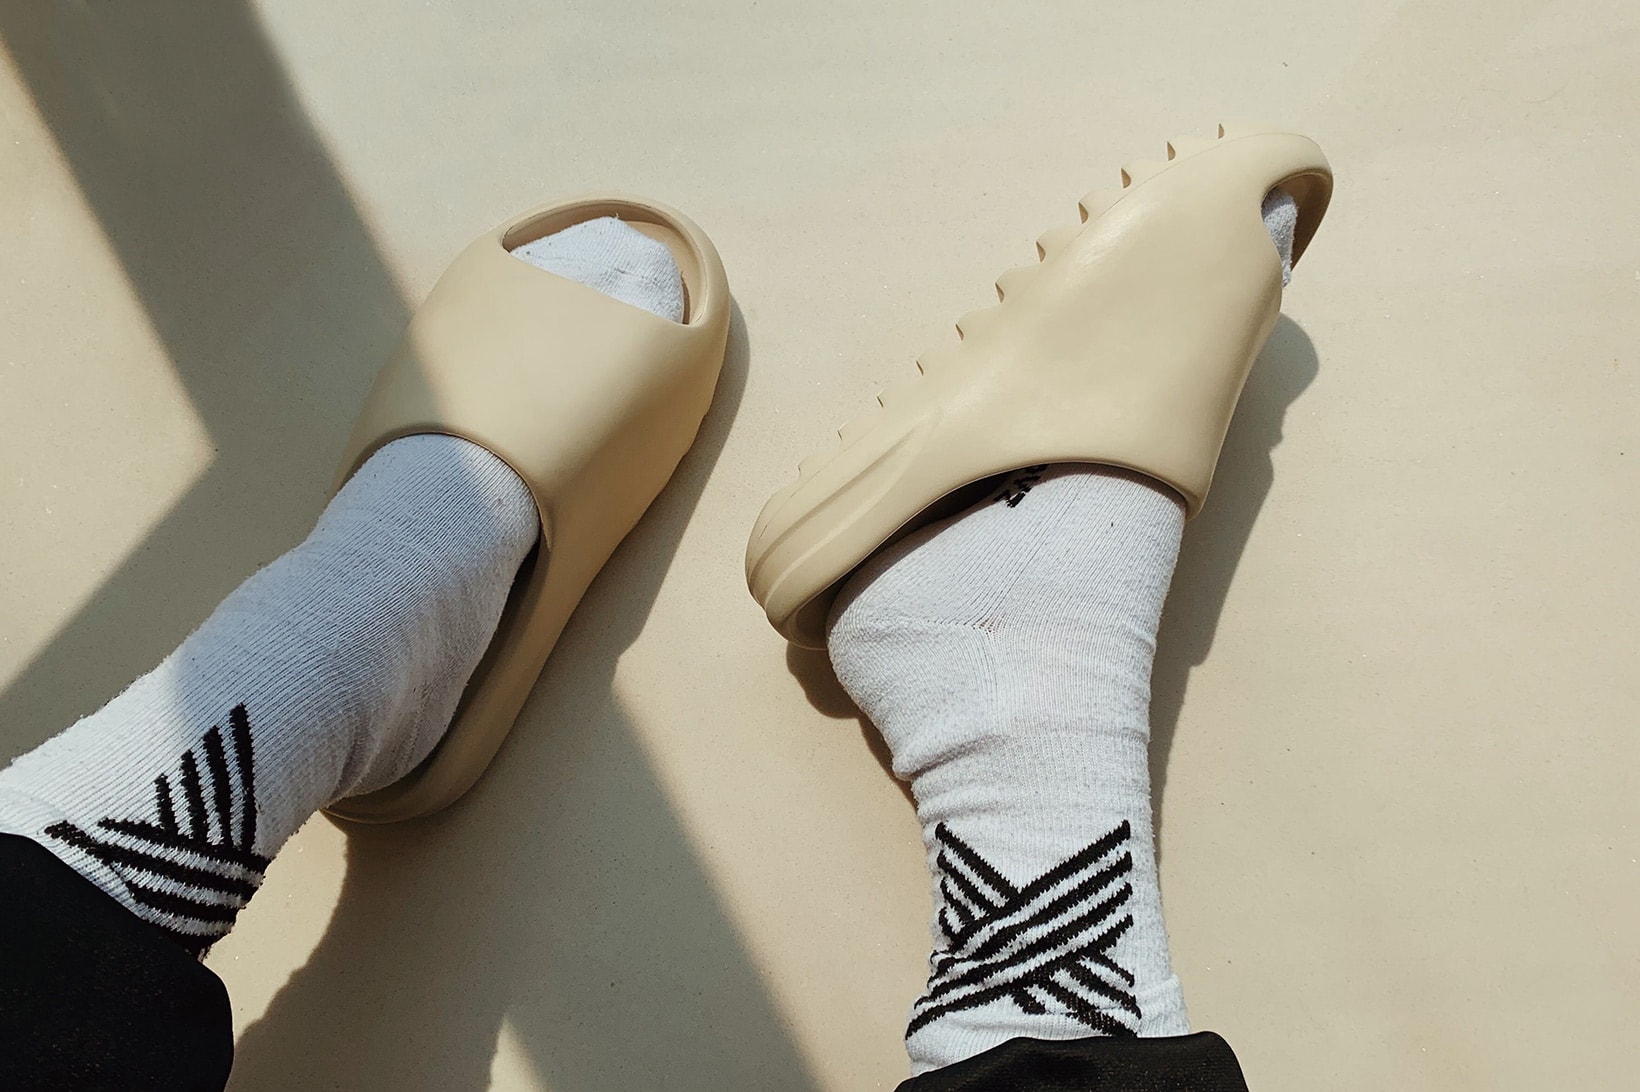 YEEZY SLIDE adidas Originals Bone Sandals Slippers On Foot Sizing Reviews Where to Buy Kanye West